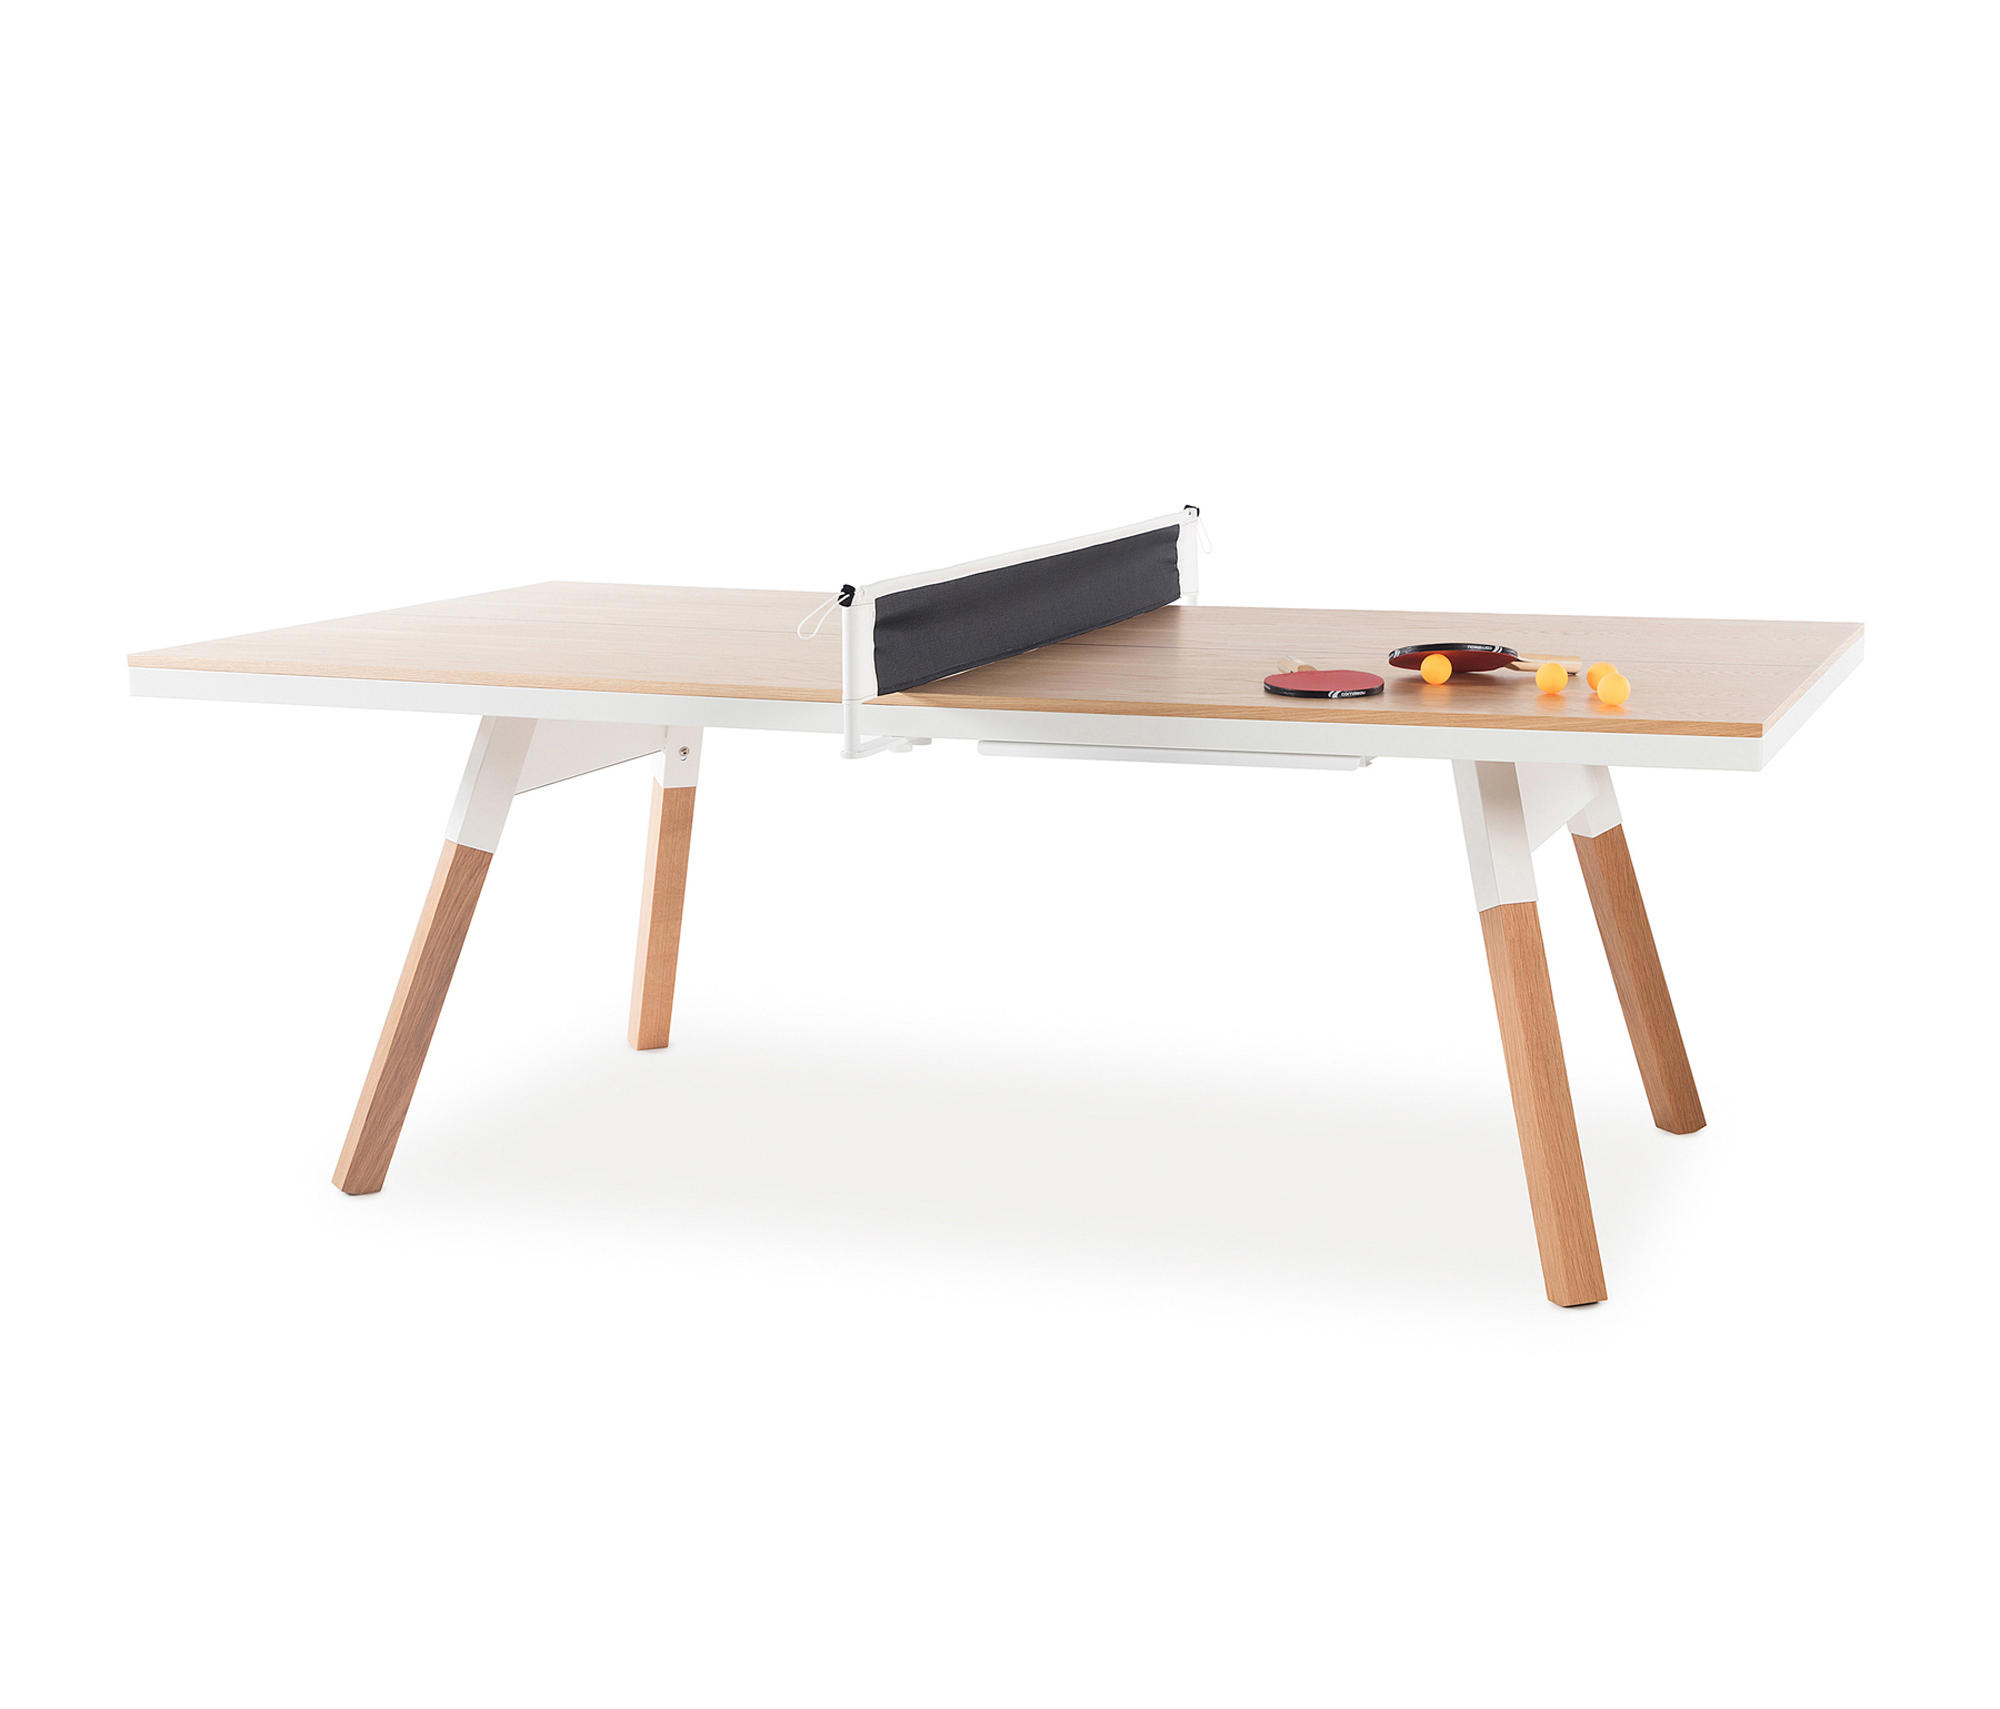 RS Barcelona You and Me Ping Pong Table - Indoor/Outdoor by Antoni Palleja  Office